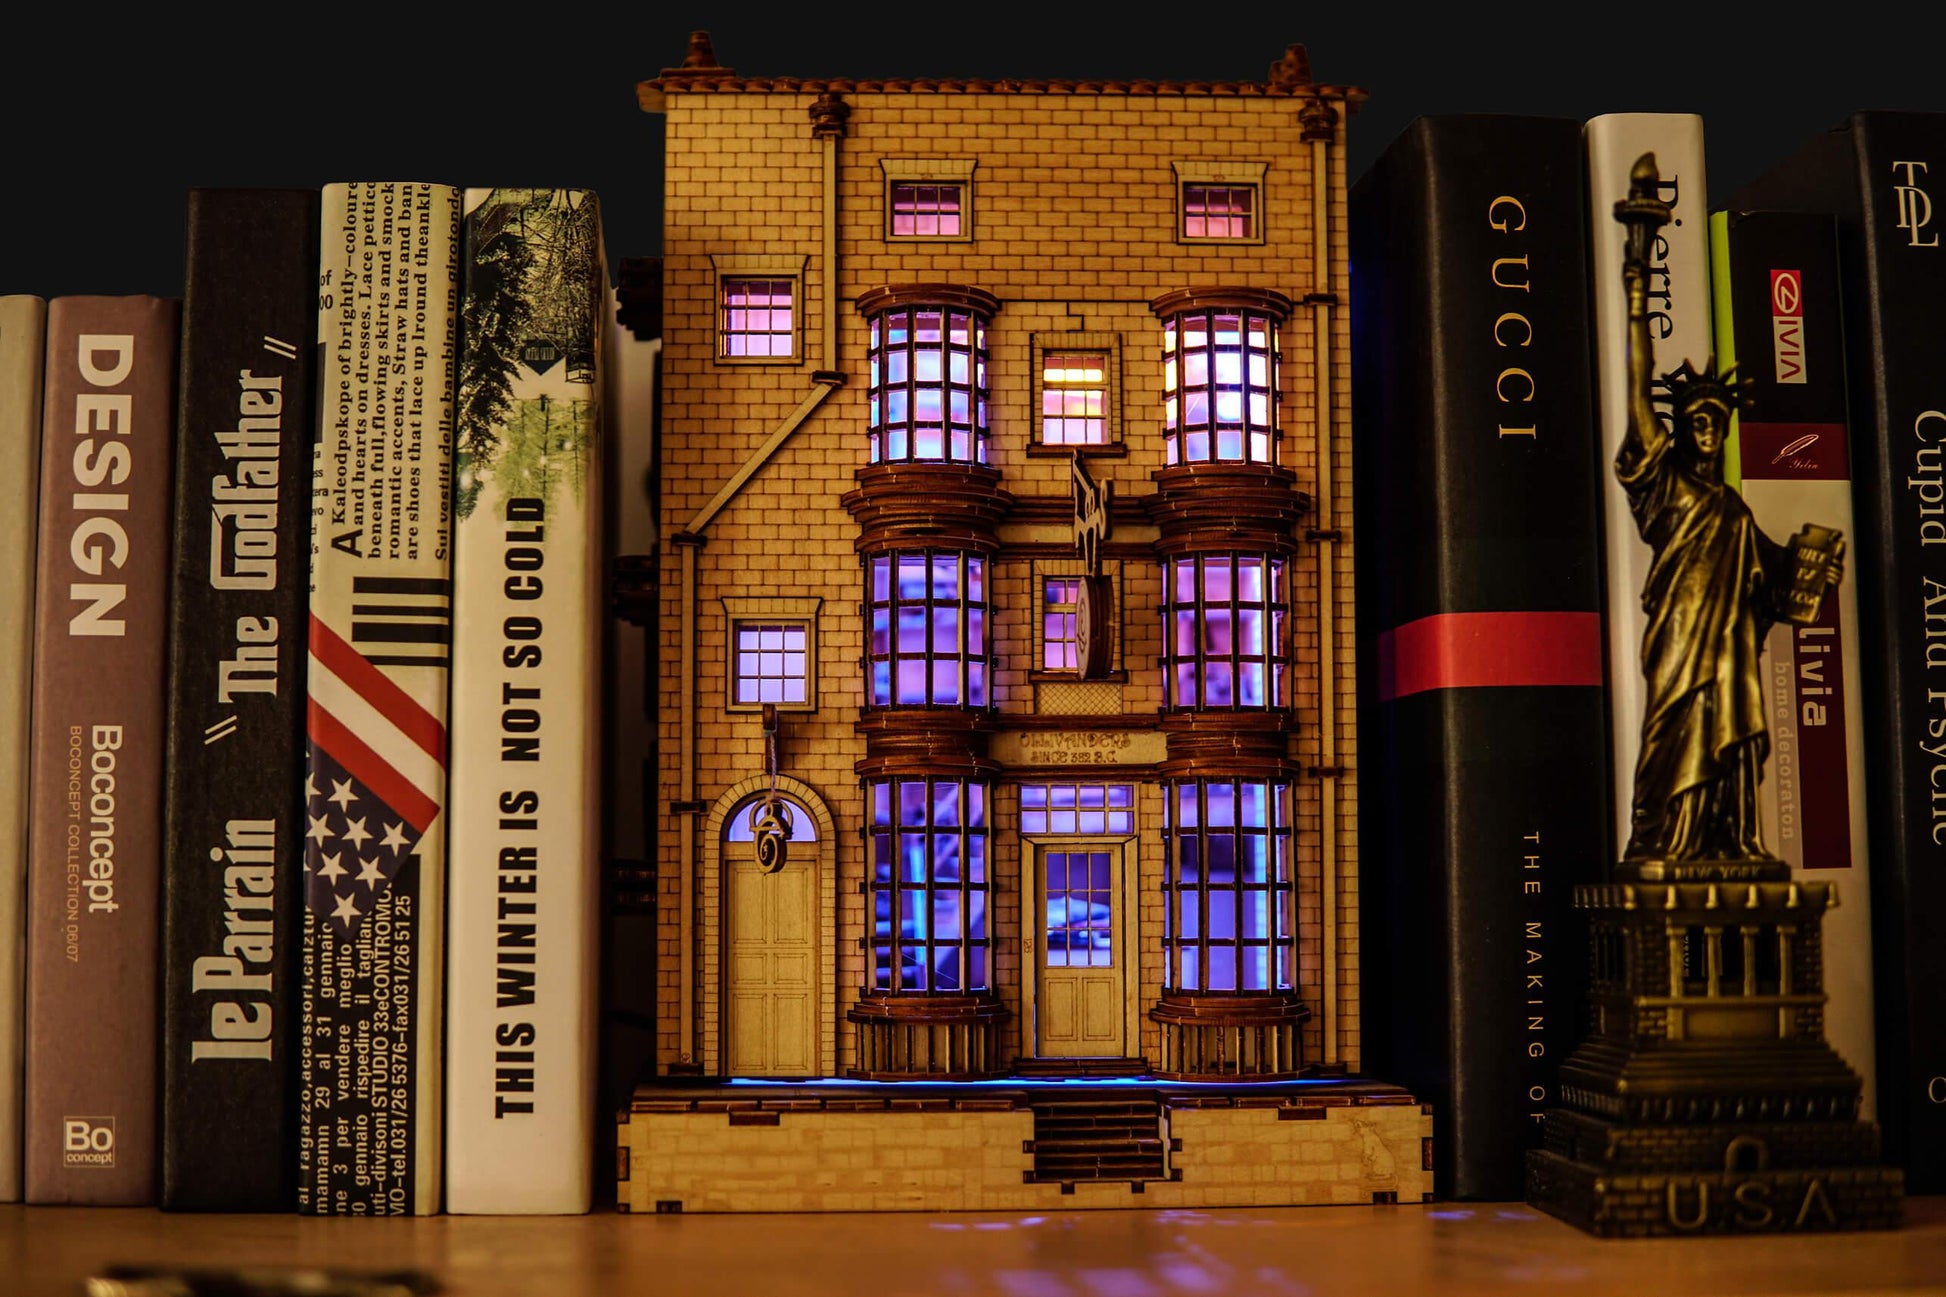 Ollivanders Wand Shop Book Nook - DIY Book Nook Kits - Wizard Alley Book Nooks Magic Alley Book Shelf Insert Book Scenery with LED - Rajbharti Crafts